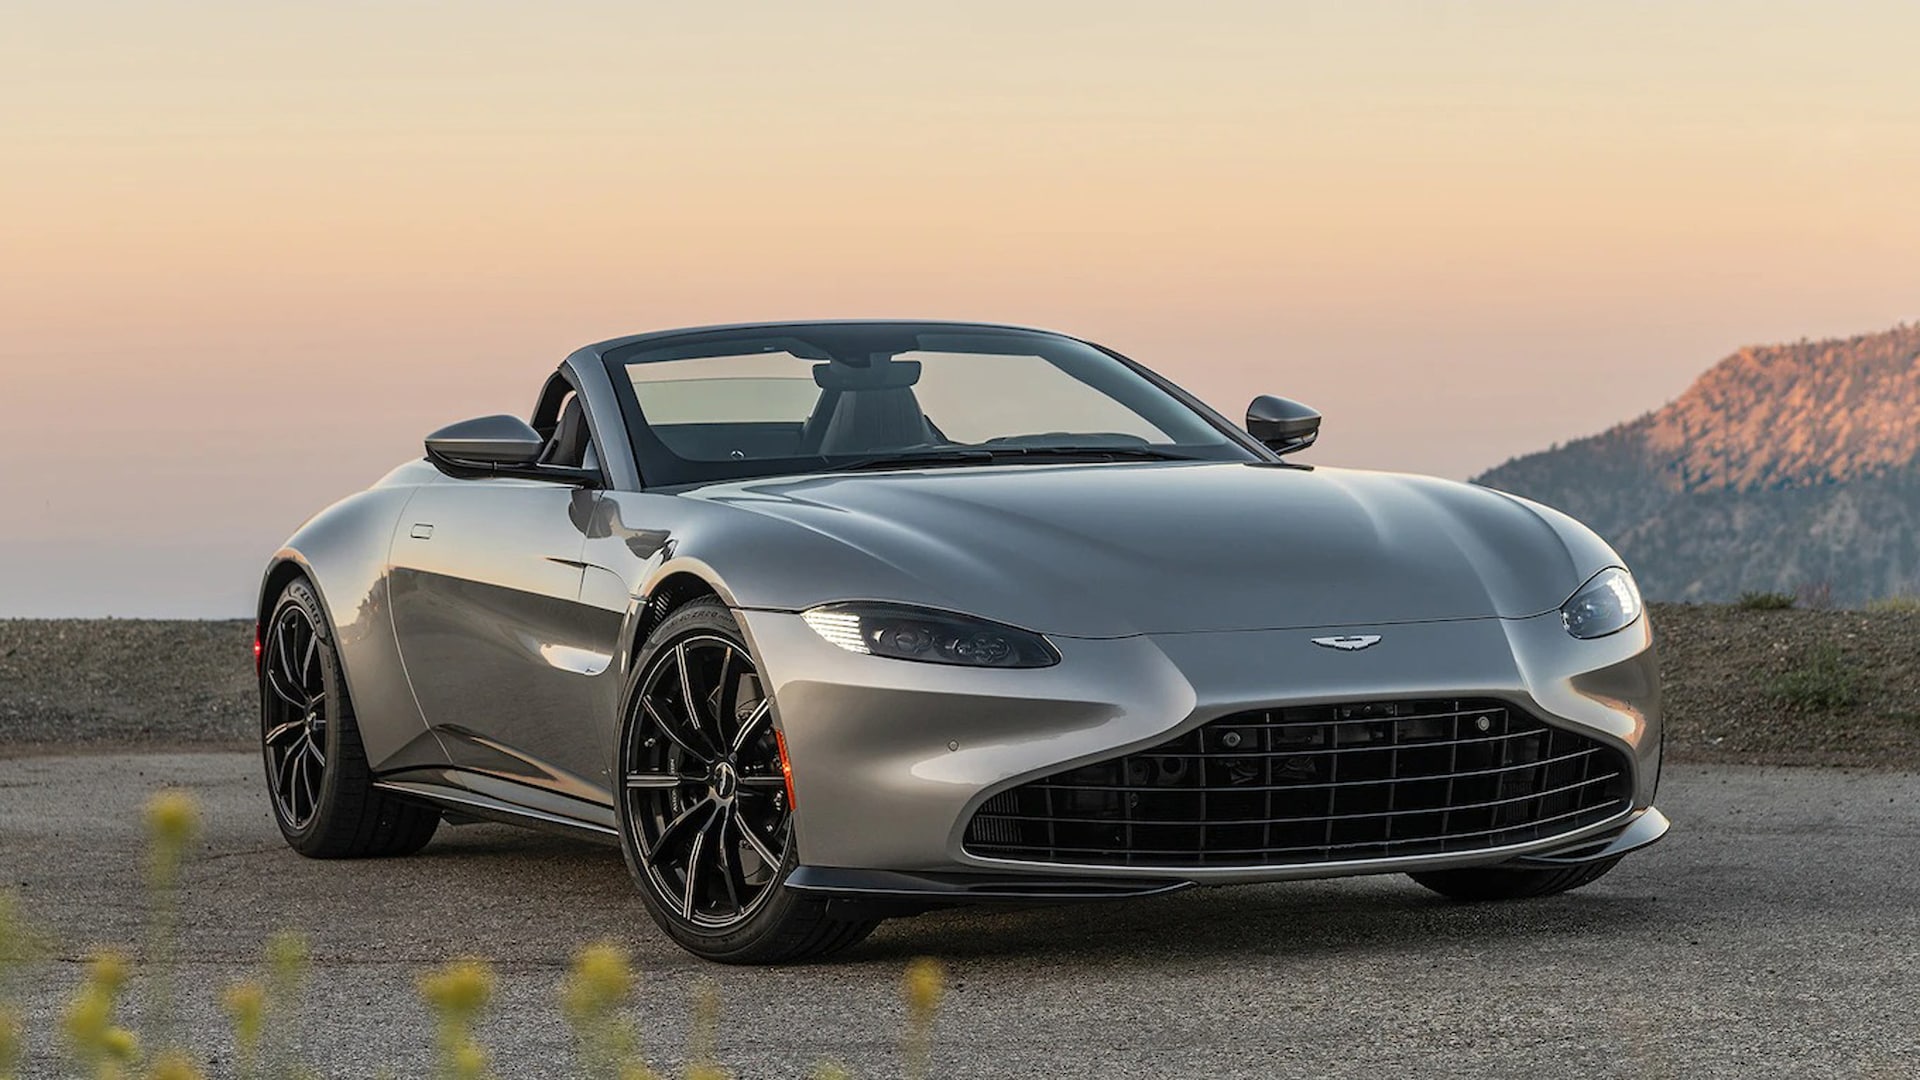 2022 Aston Martin Vantage Prices, Reviews, and Photos - MotorTrend